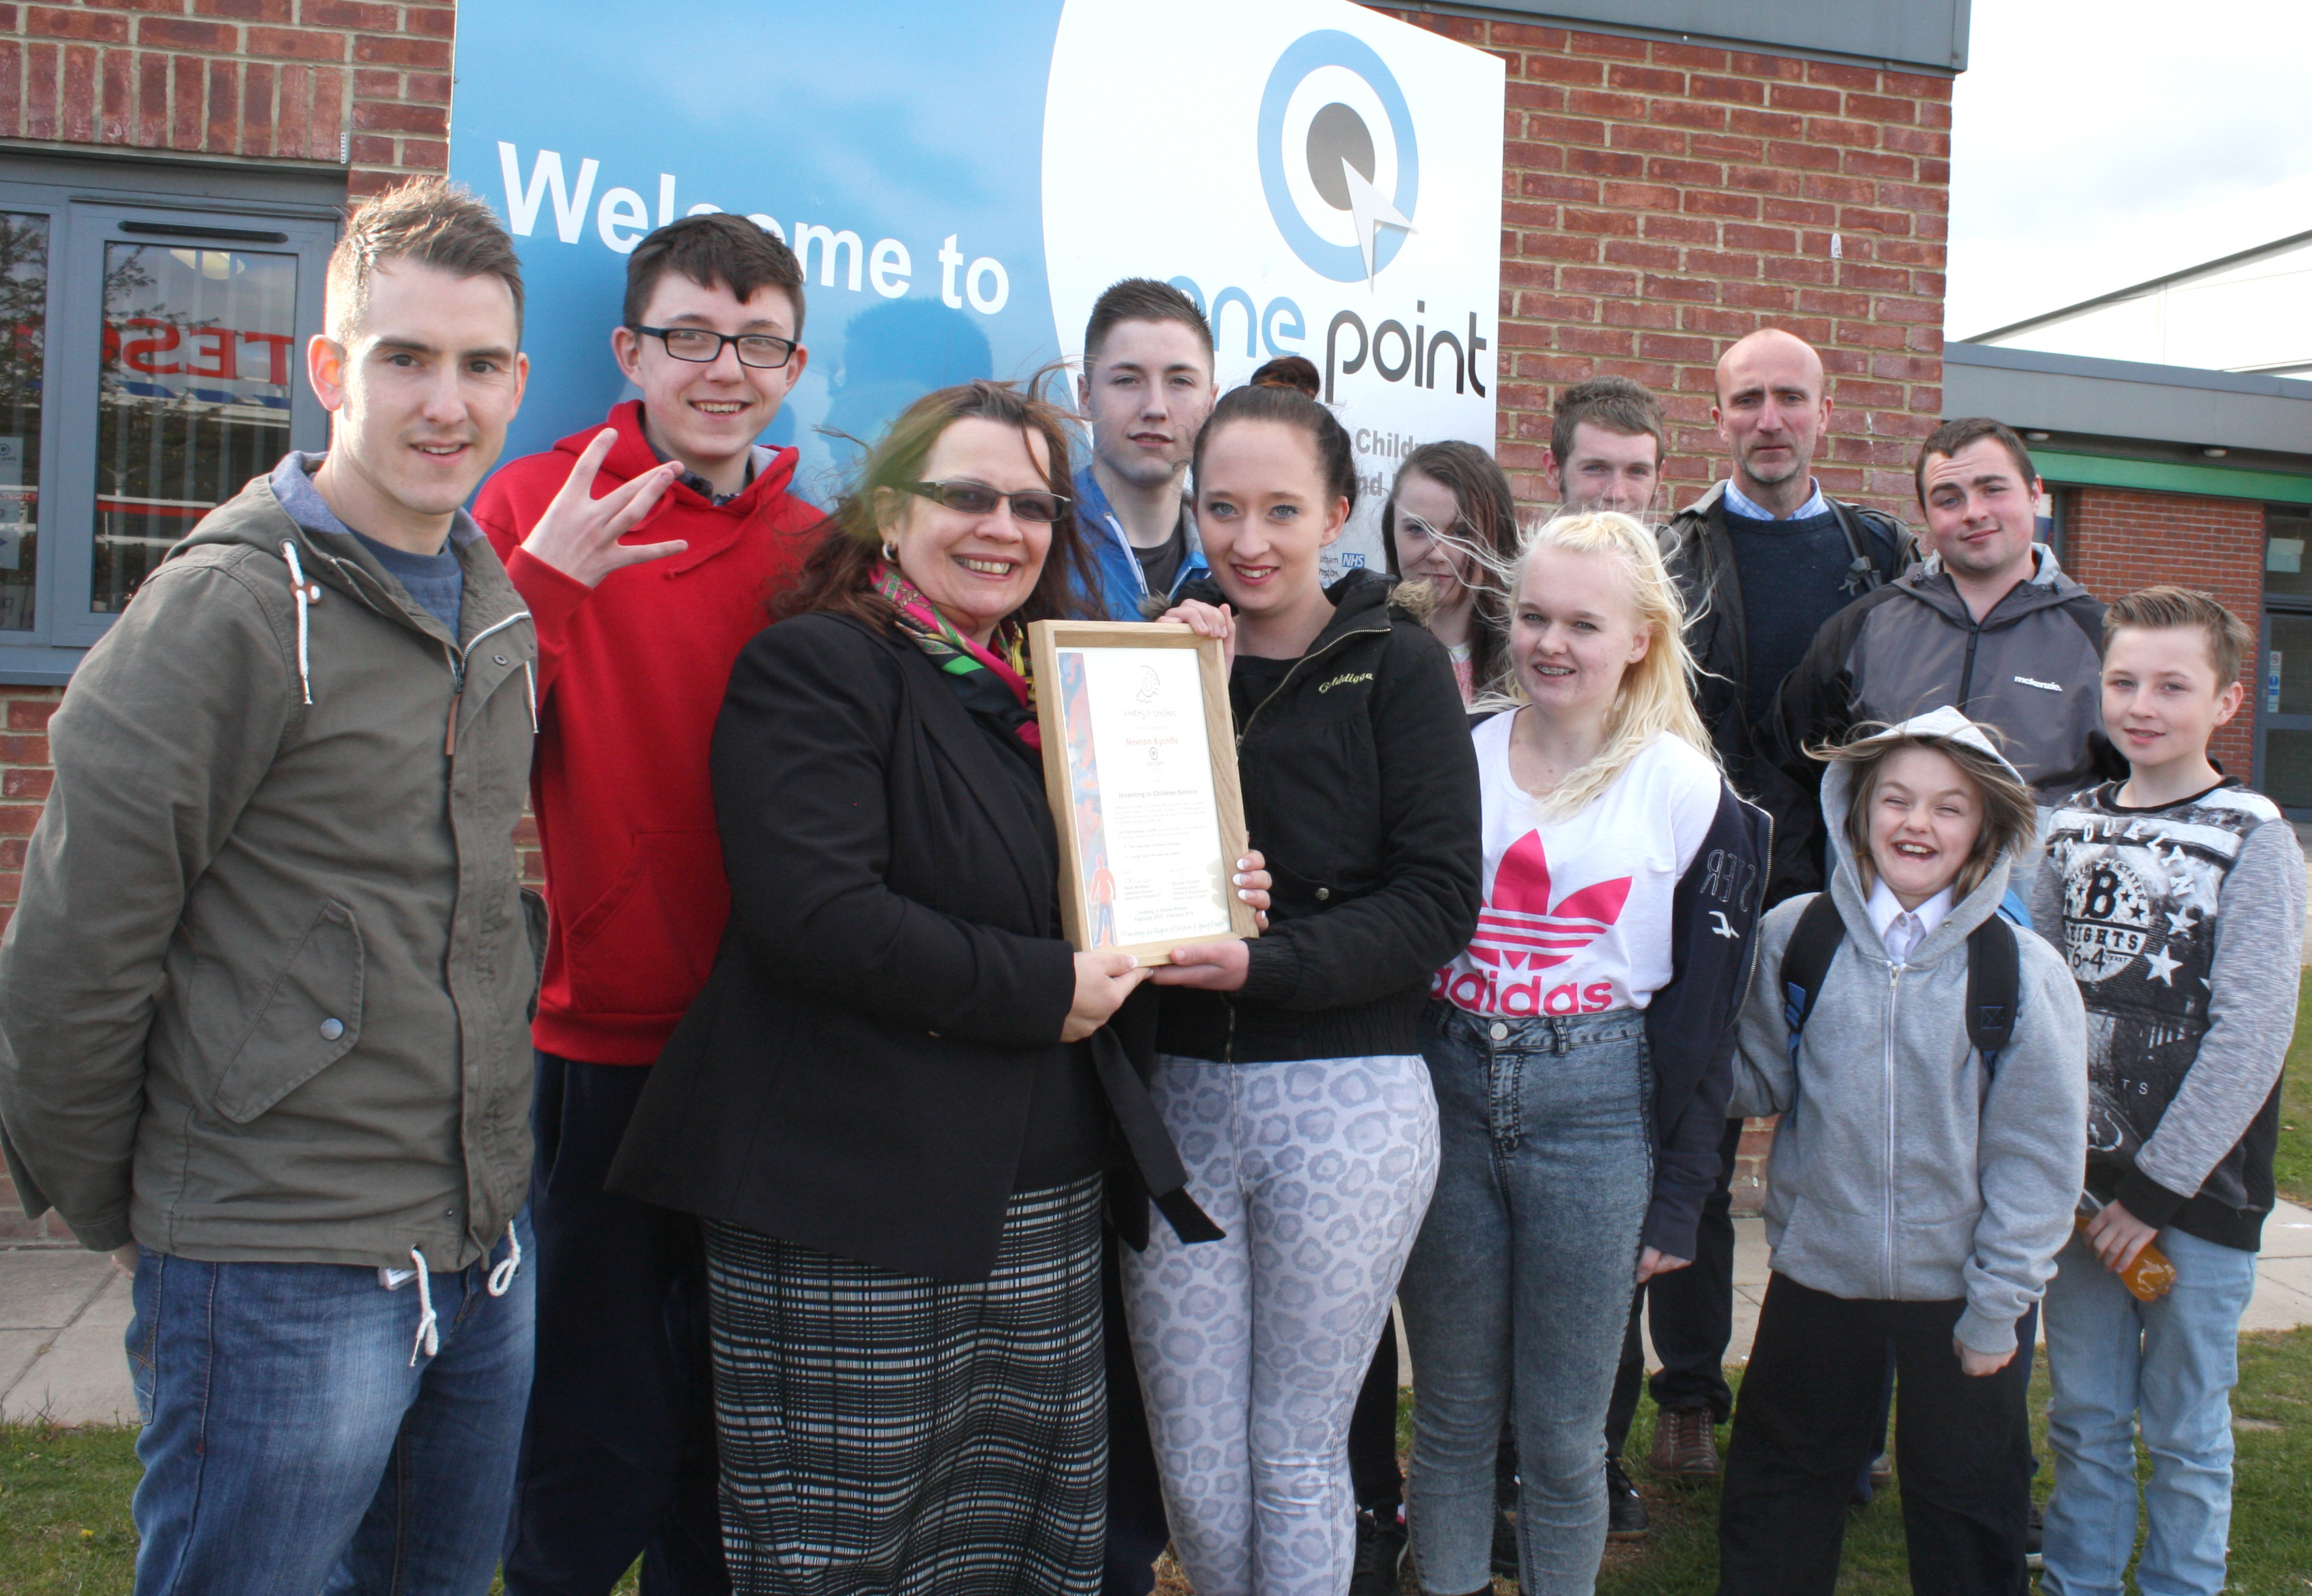 IIC Award for Aycliffe One Point